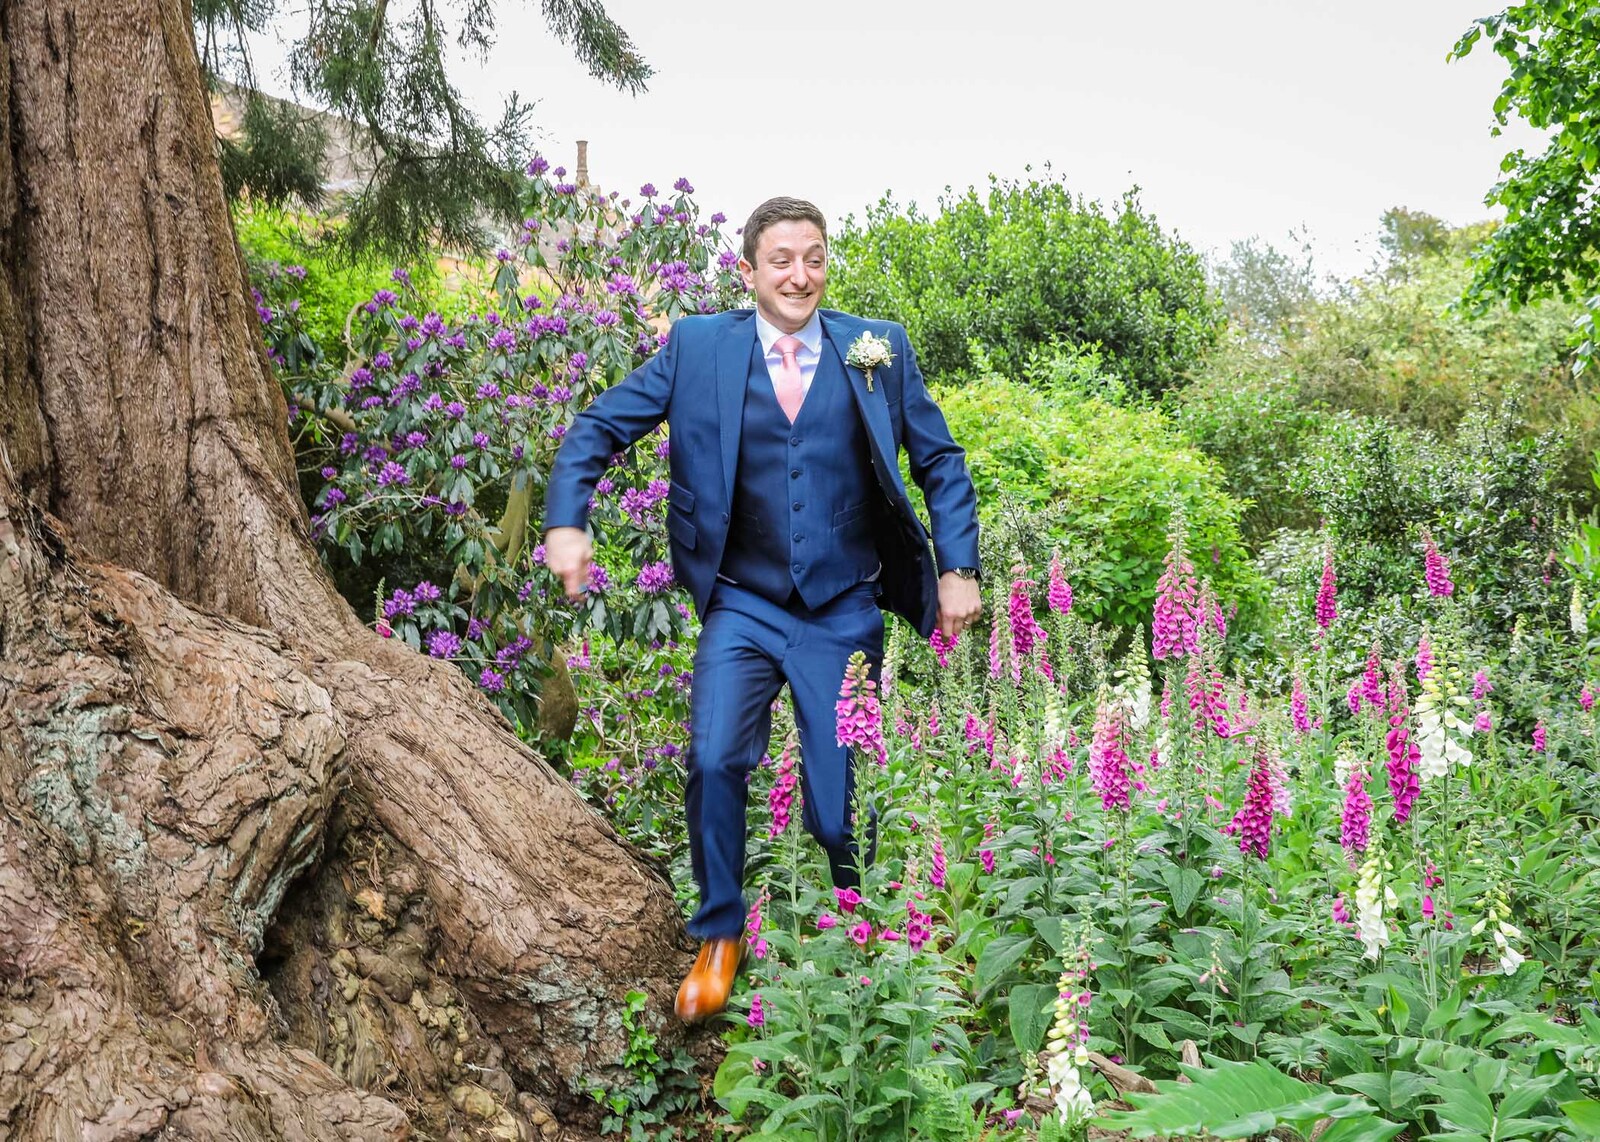 A groom jumping out of foxgloves in the wood at Haughley Park Barn Wedding Venue photographed by Suffolk Wedding Photographers Hayley Denston Photography